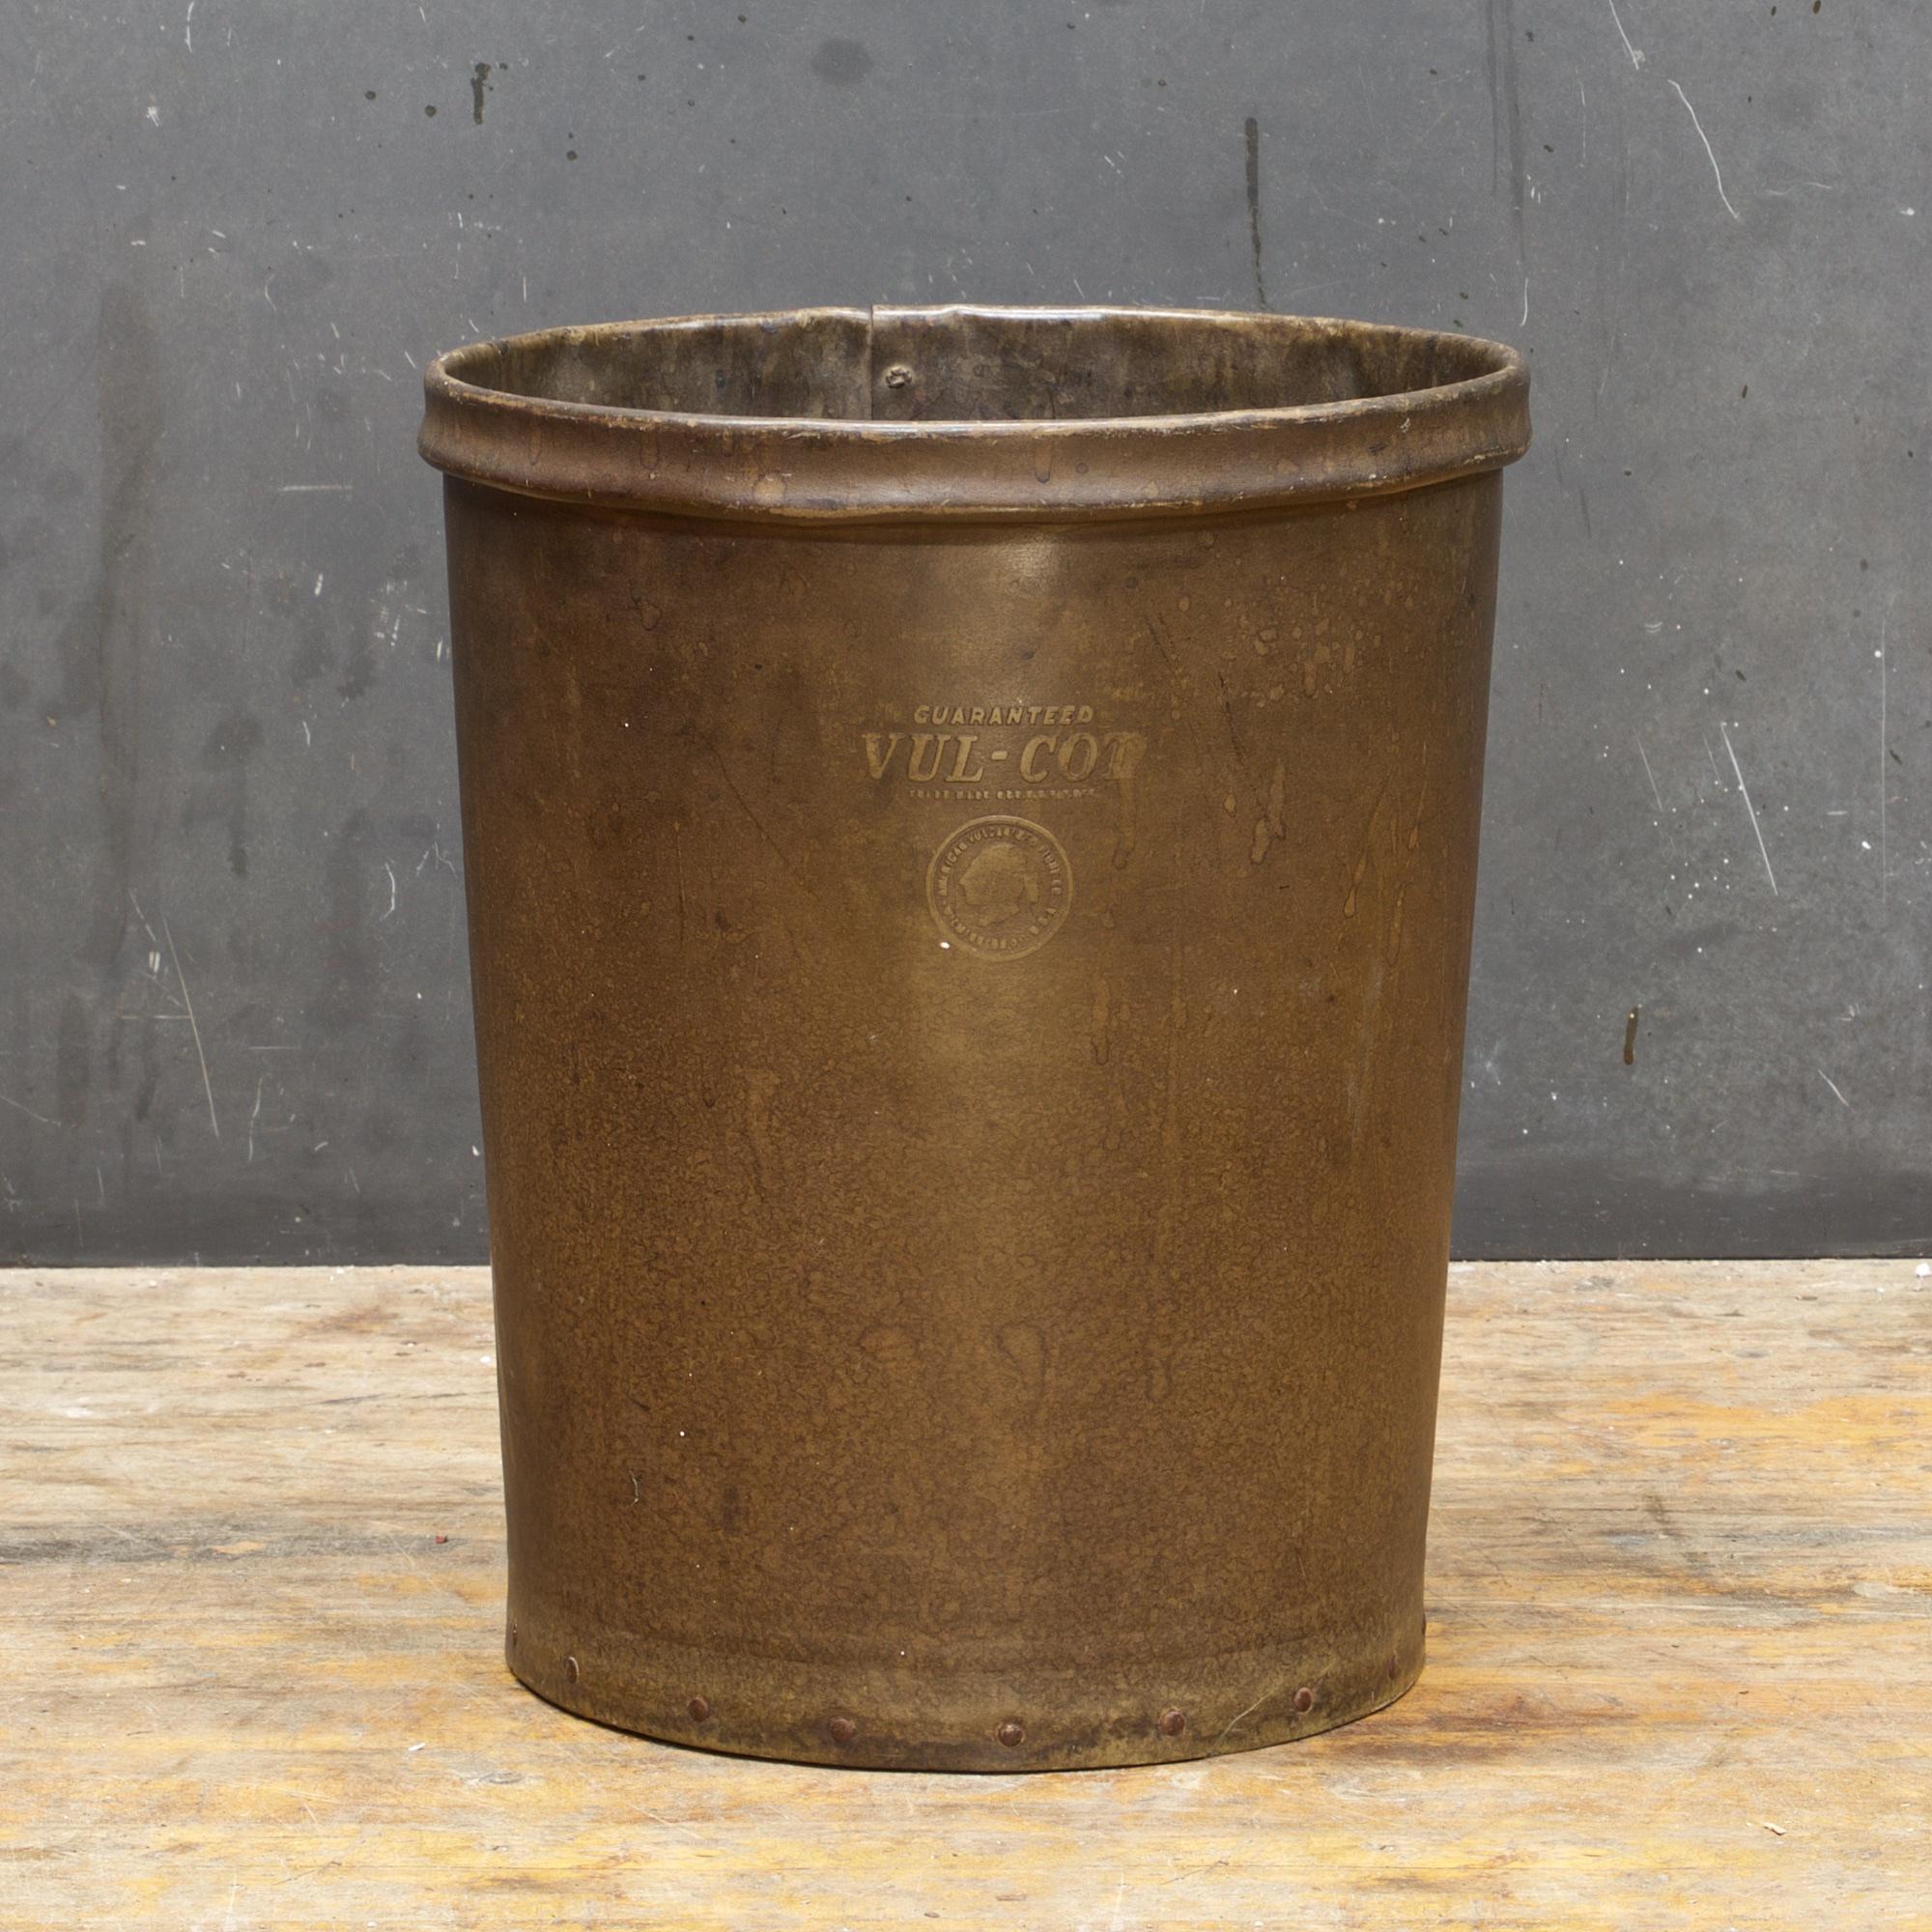 American vulcanized fiber company factory office trash can. Clearly ink stamped dated 1931.

Measure: D 12 1/2 x H 14 1/2 in.


